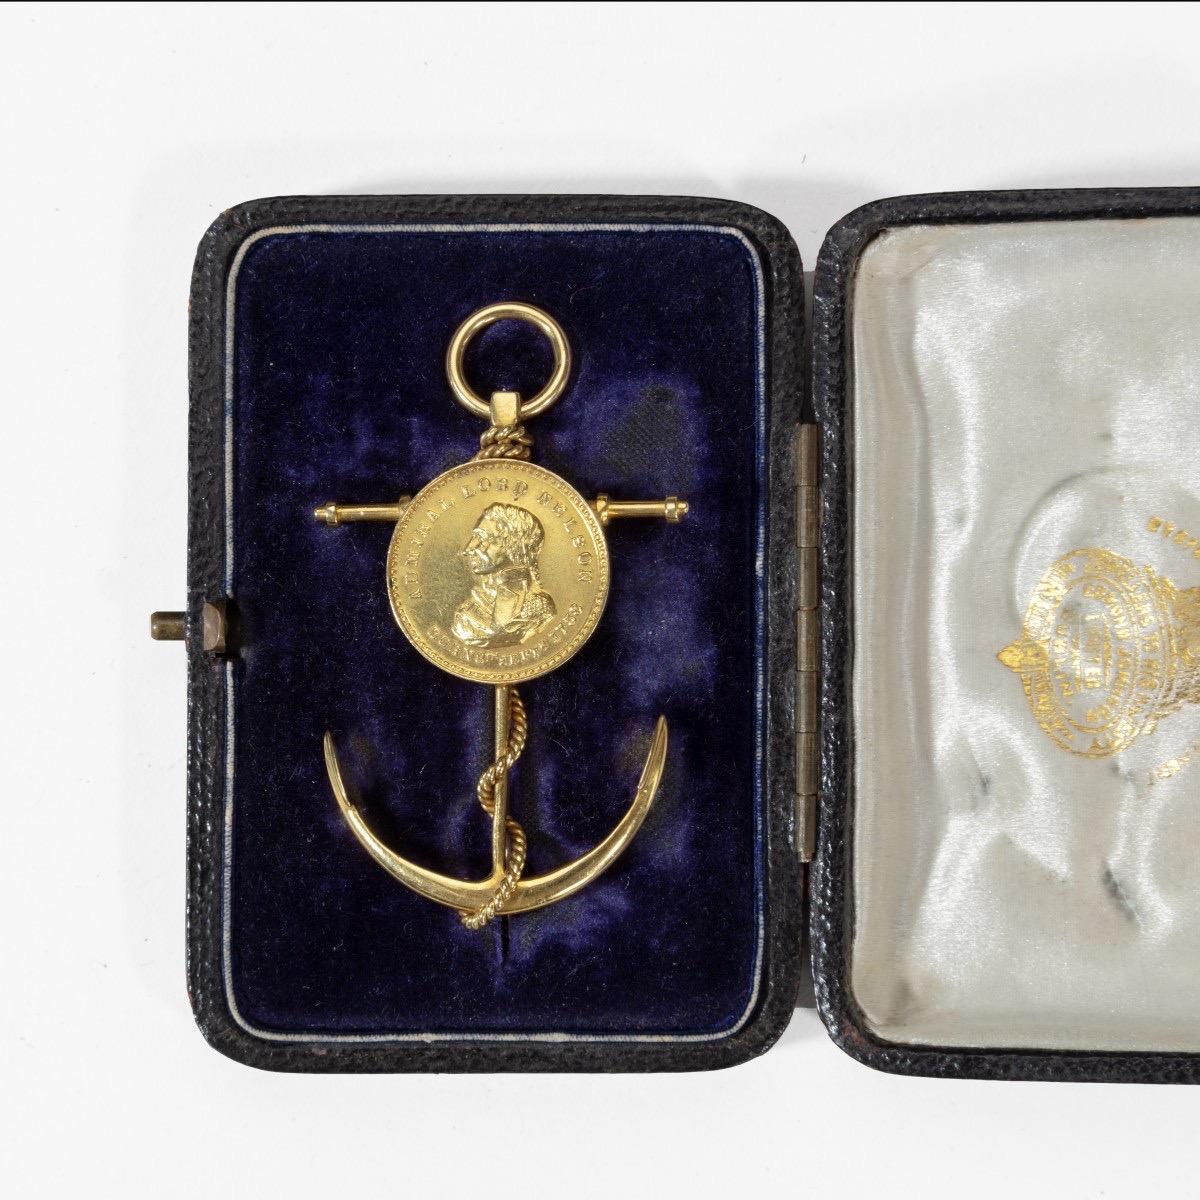 Commemorative brooch by Edmund Johnson Ltd of Dublin, in 18-carat gold with its original fitted case

Designed in the form of an anchor, set with a commemorative medallion with portrait of “Admiral Lord Nelson, born 9th September 1758”, the anchor